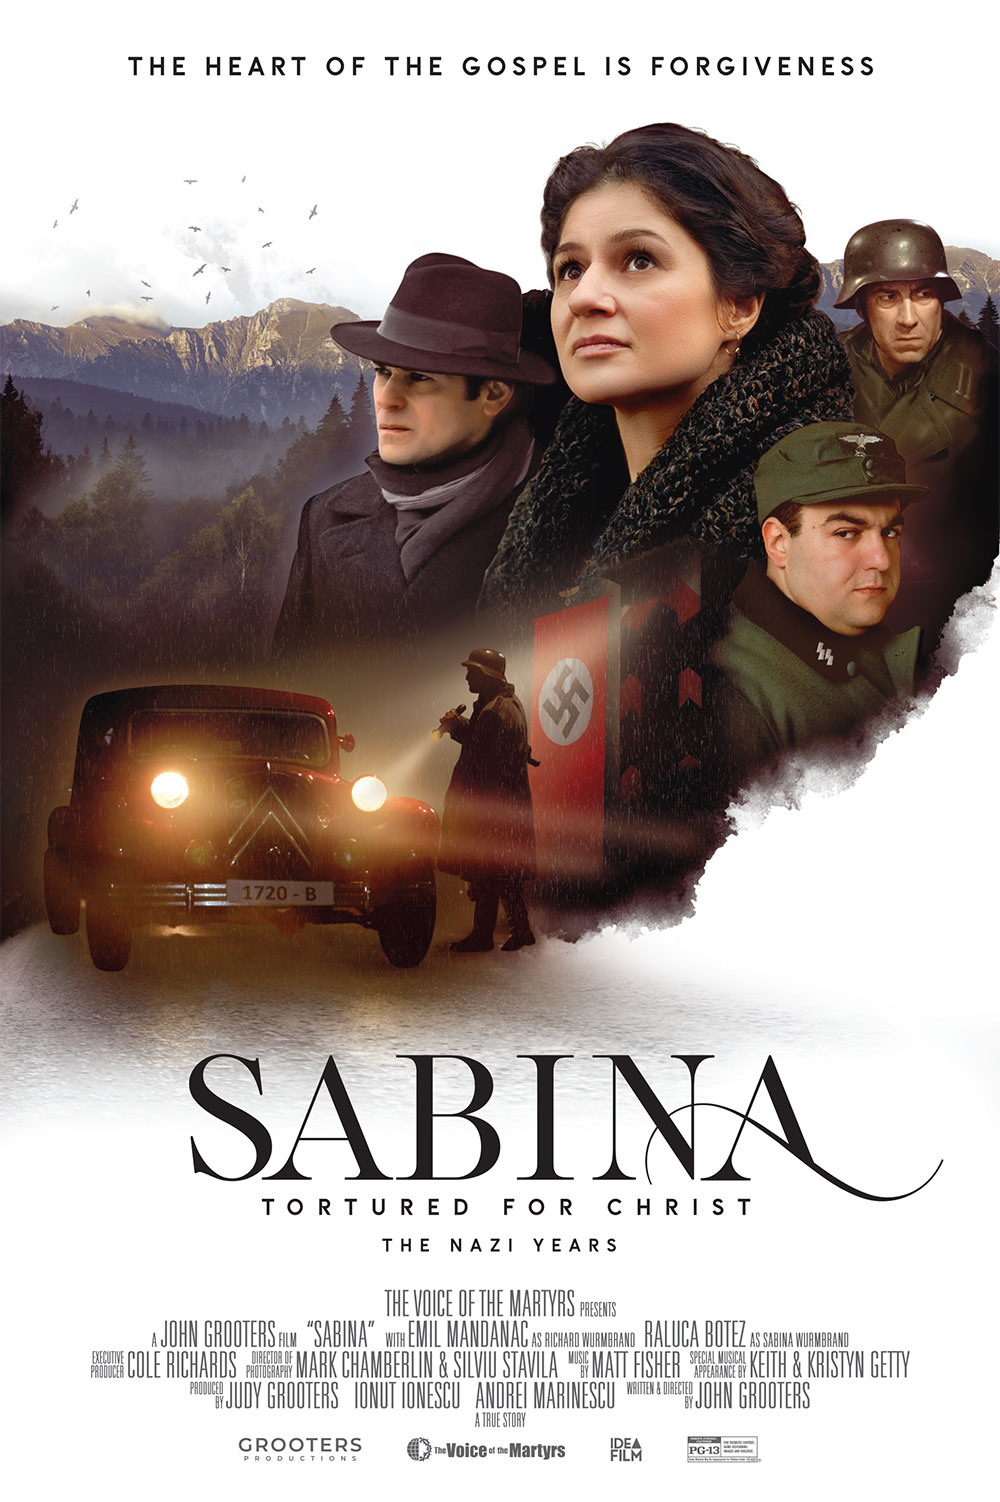 Movie poster showing faces from Sabina the movie